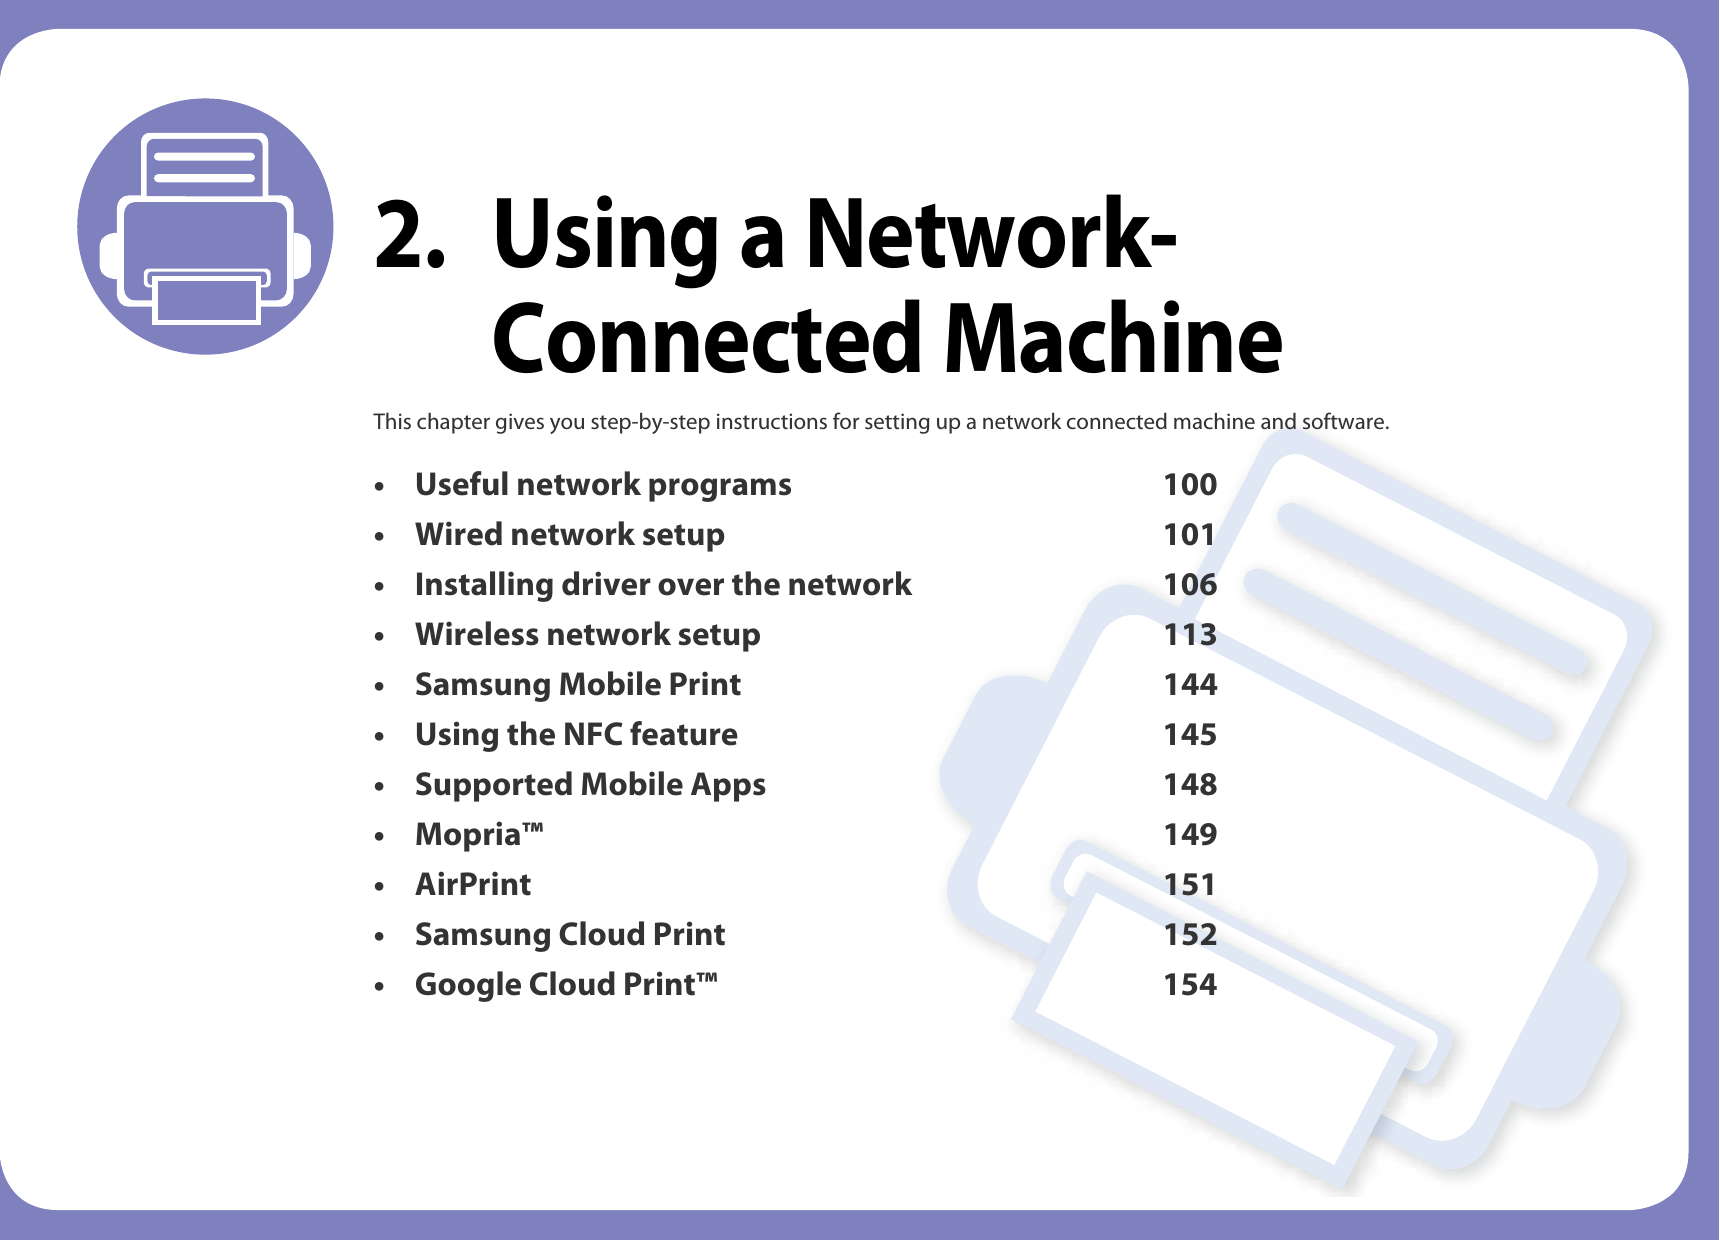 2. Using a Network-Connected MachineThis chapter gives you step-by-step instructions for setting up a network connected machine and software.• Useful network programs 100• Wired network setup 101• Installing driver over the network 106• Wireless network setup 113• Samsung Mobile Print 144• Using the NFC feature 145• Supported Mobile Apps 148• Mopria™ 149• AirPrint 151• Samsung Cloud Print 152• Google Cloud Print™ 154